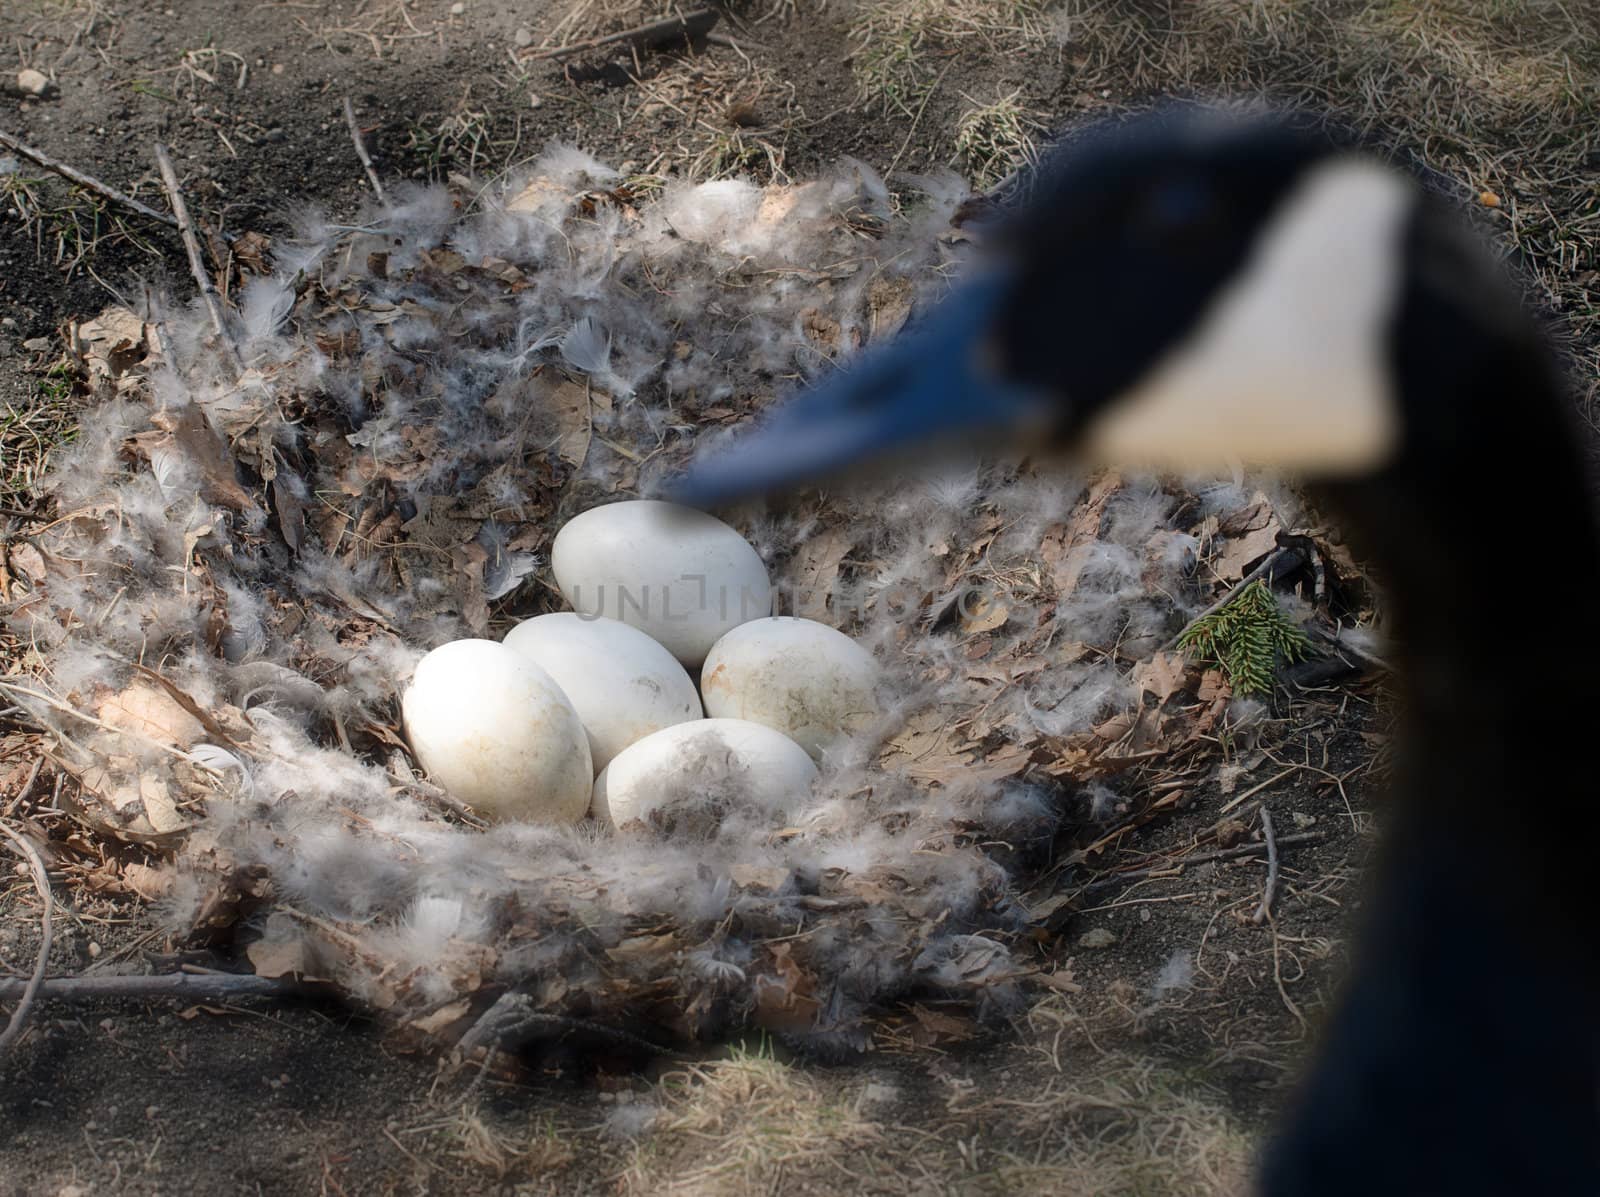 Goose eggs in a nest waiting to hatch, with a goose out of focus in the foreground